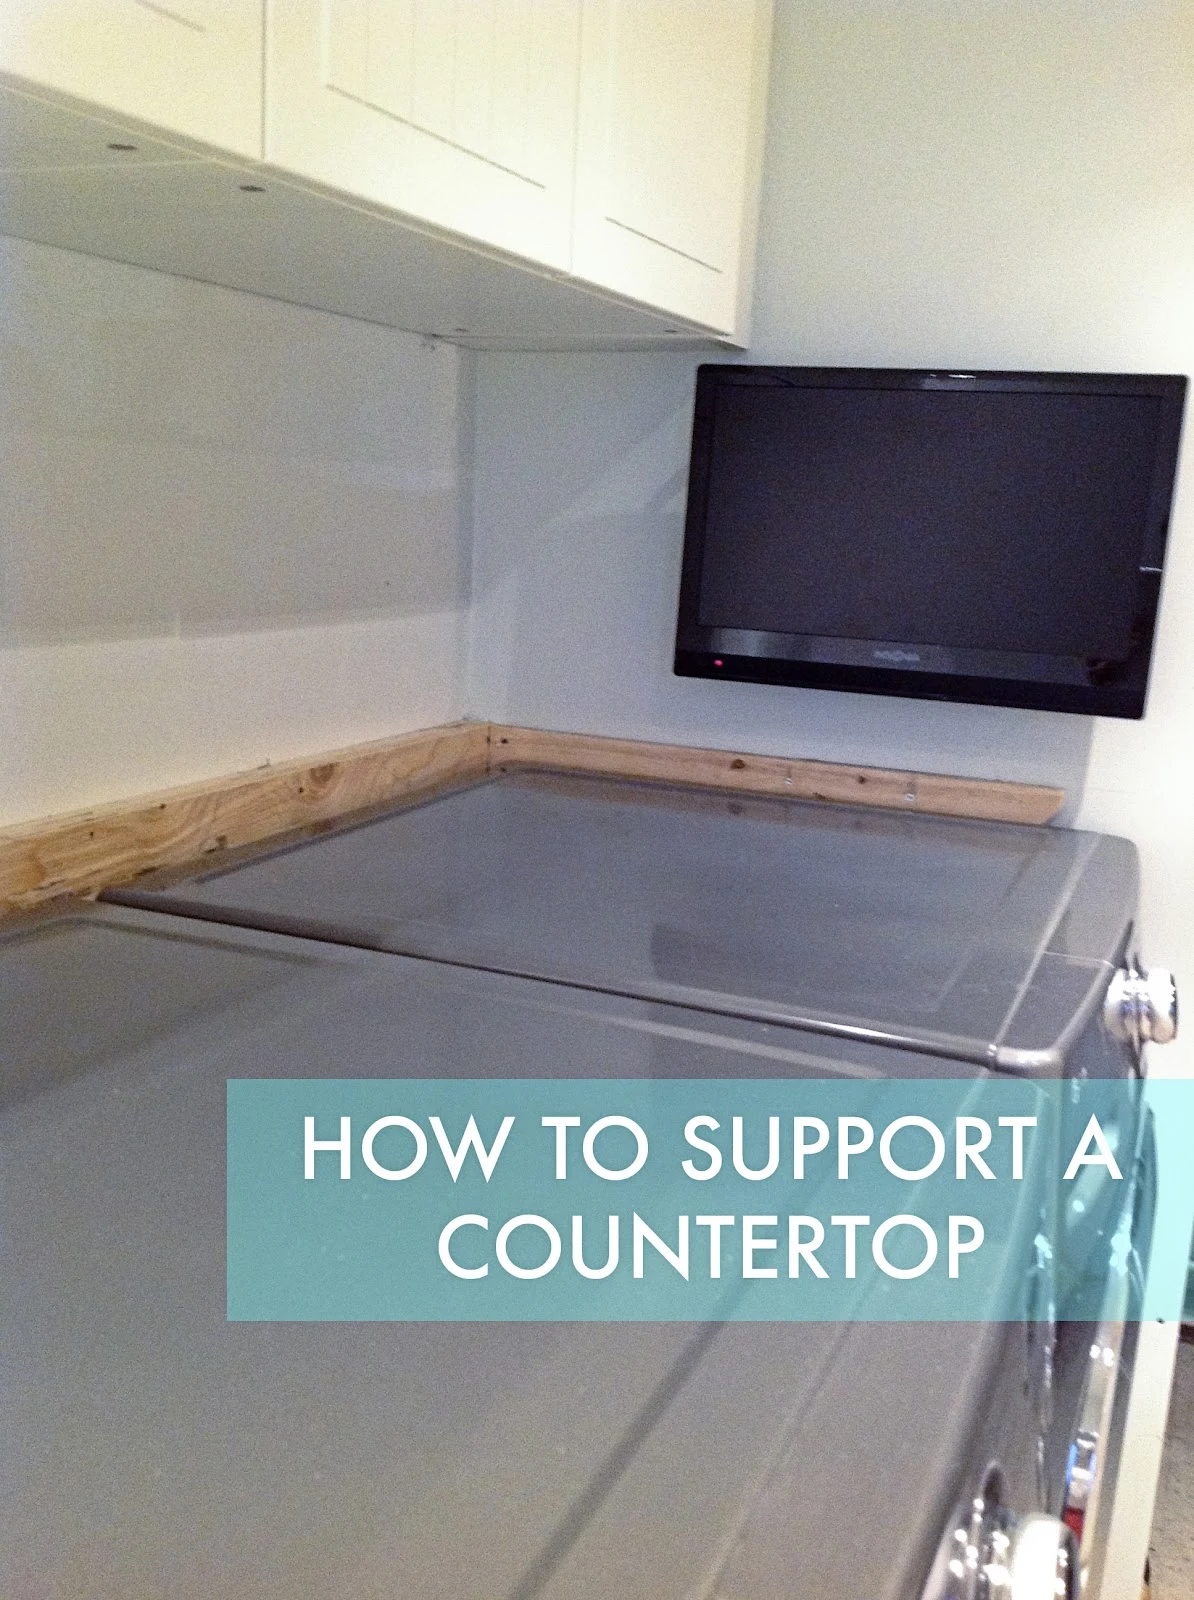 counter over front load washer and dryer, How To Install A Countertop Over A Washer And Dryer, DIY floating countertop in the laundry room, countertop cleat